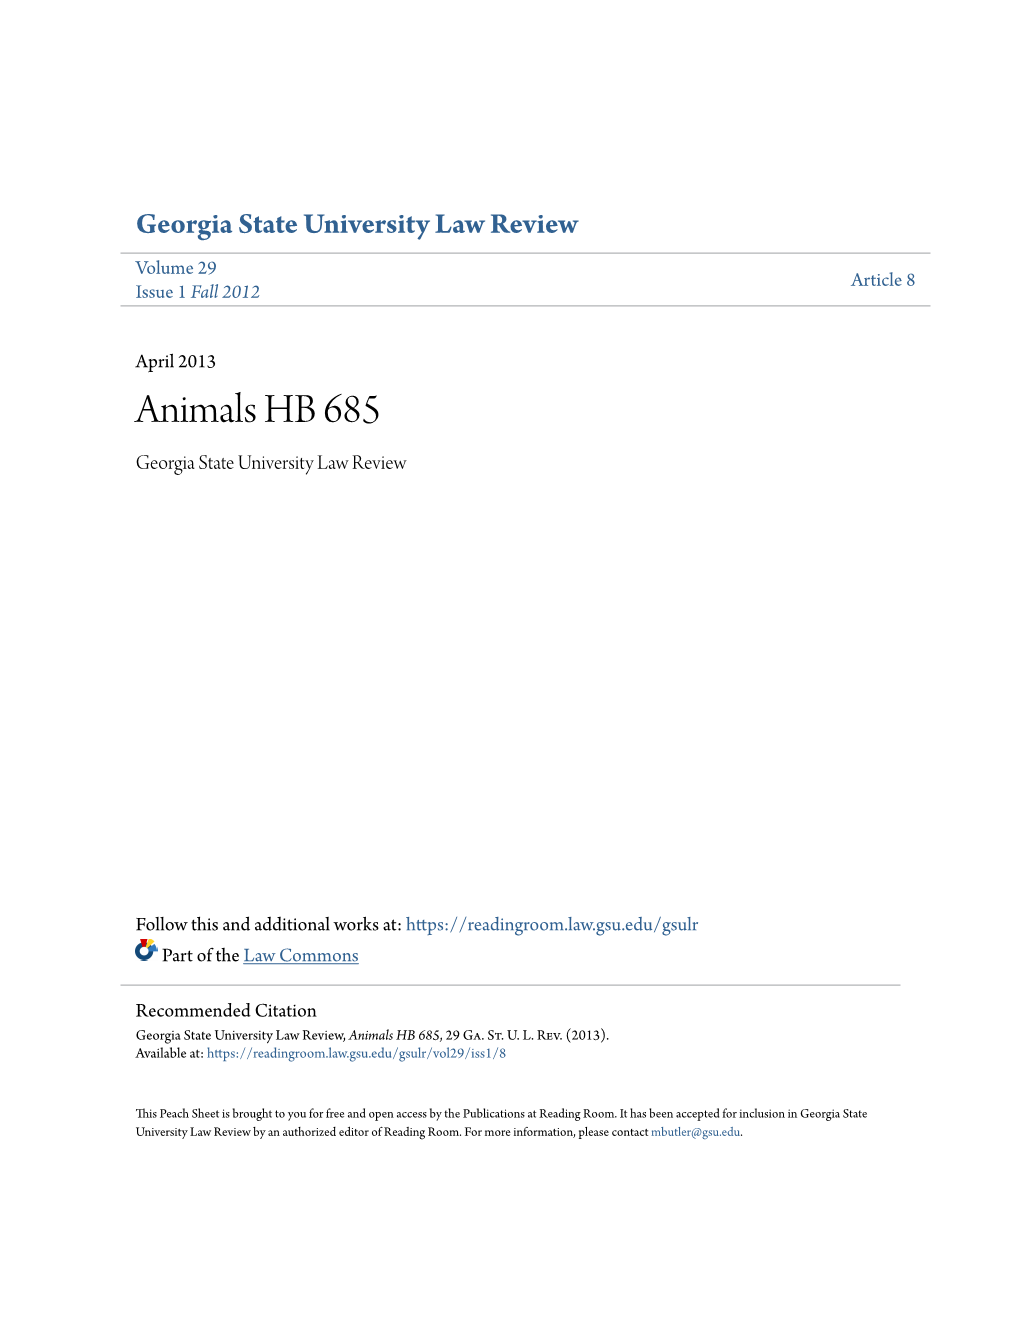 Animals HB 685 Georgia State University Law Review